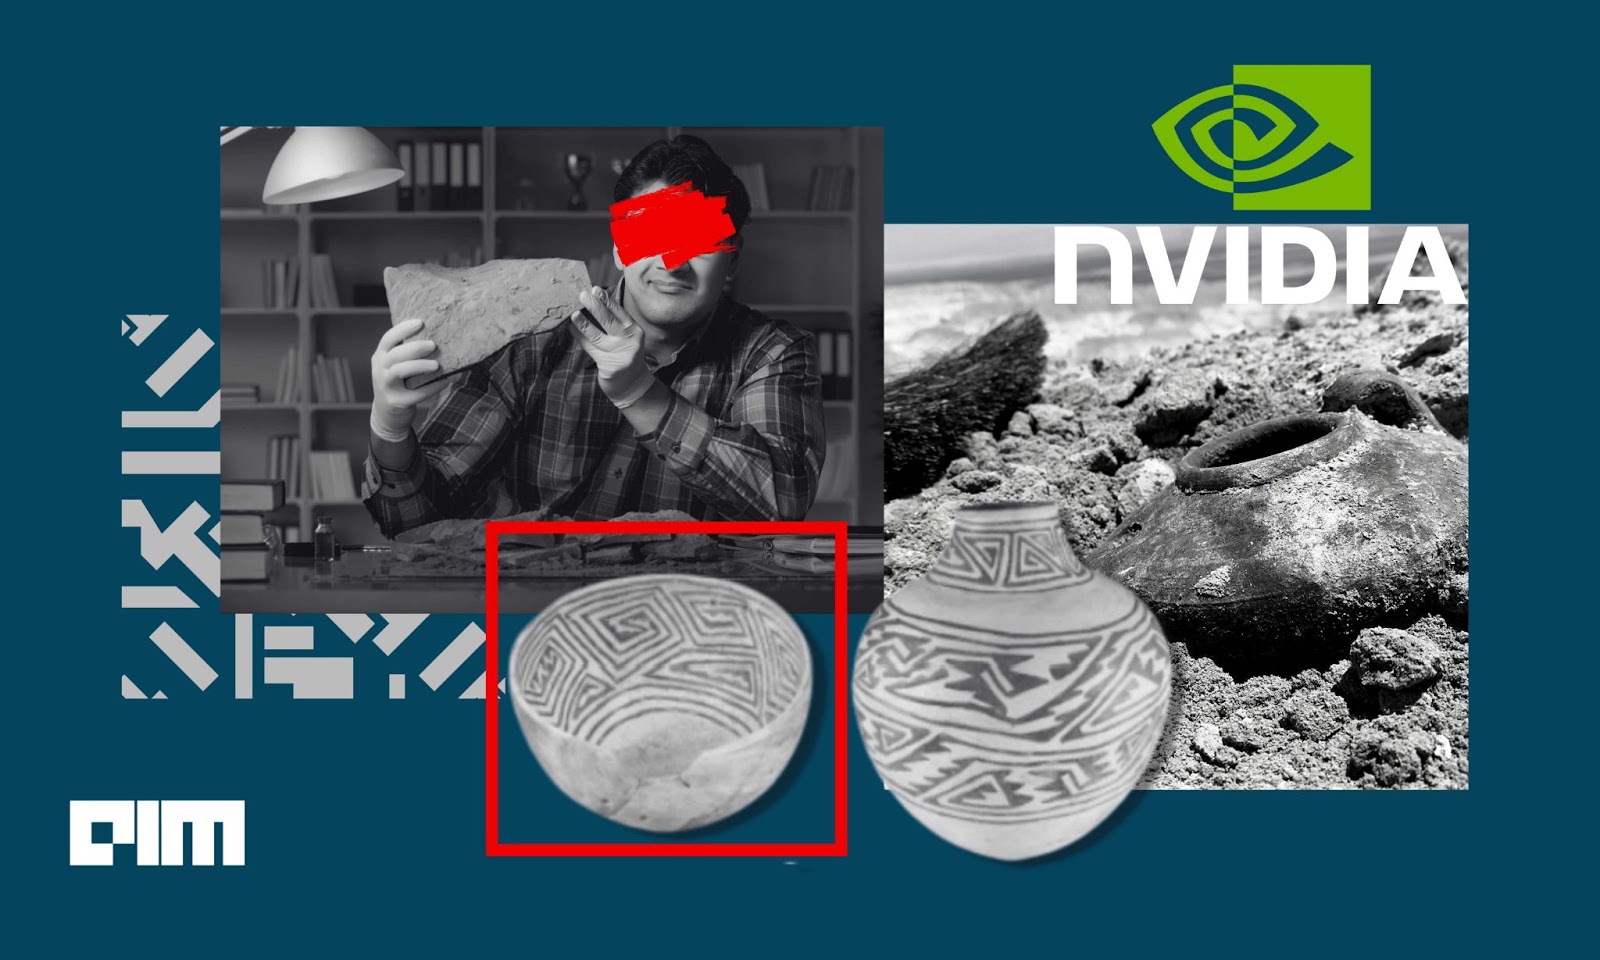 GPU-Accelerated Deep Learning Sorts Pottery Fragments - Image